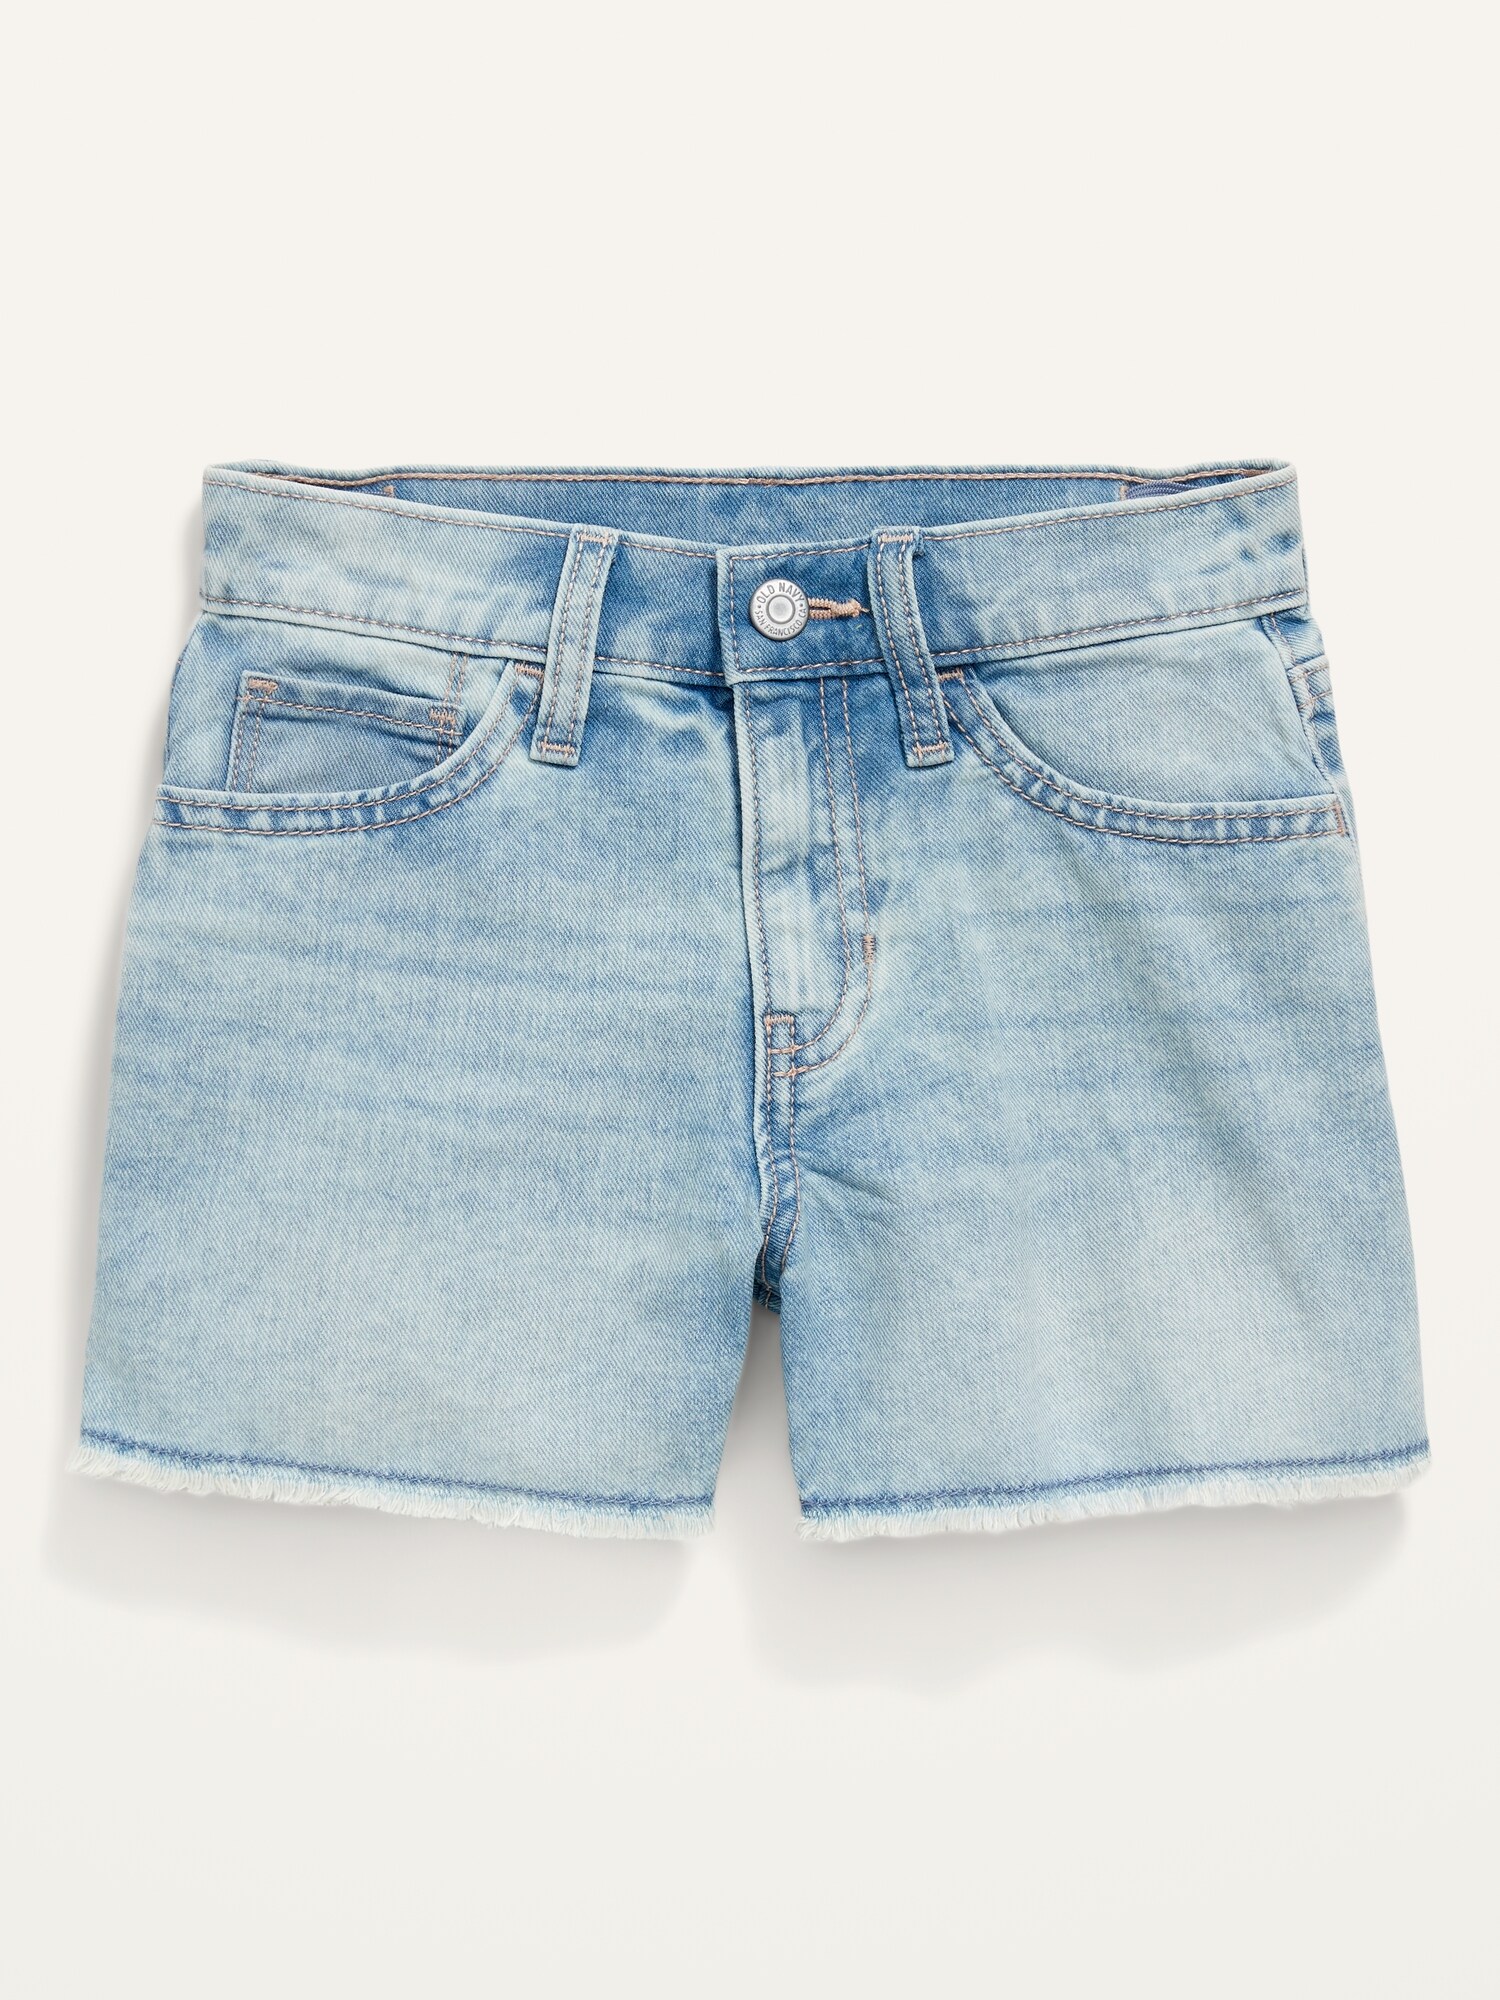 High-Waisted Cut-Off Non-Stretch Jean Shorts for Girls | Old Navy